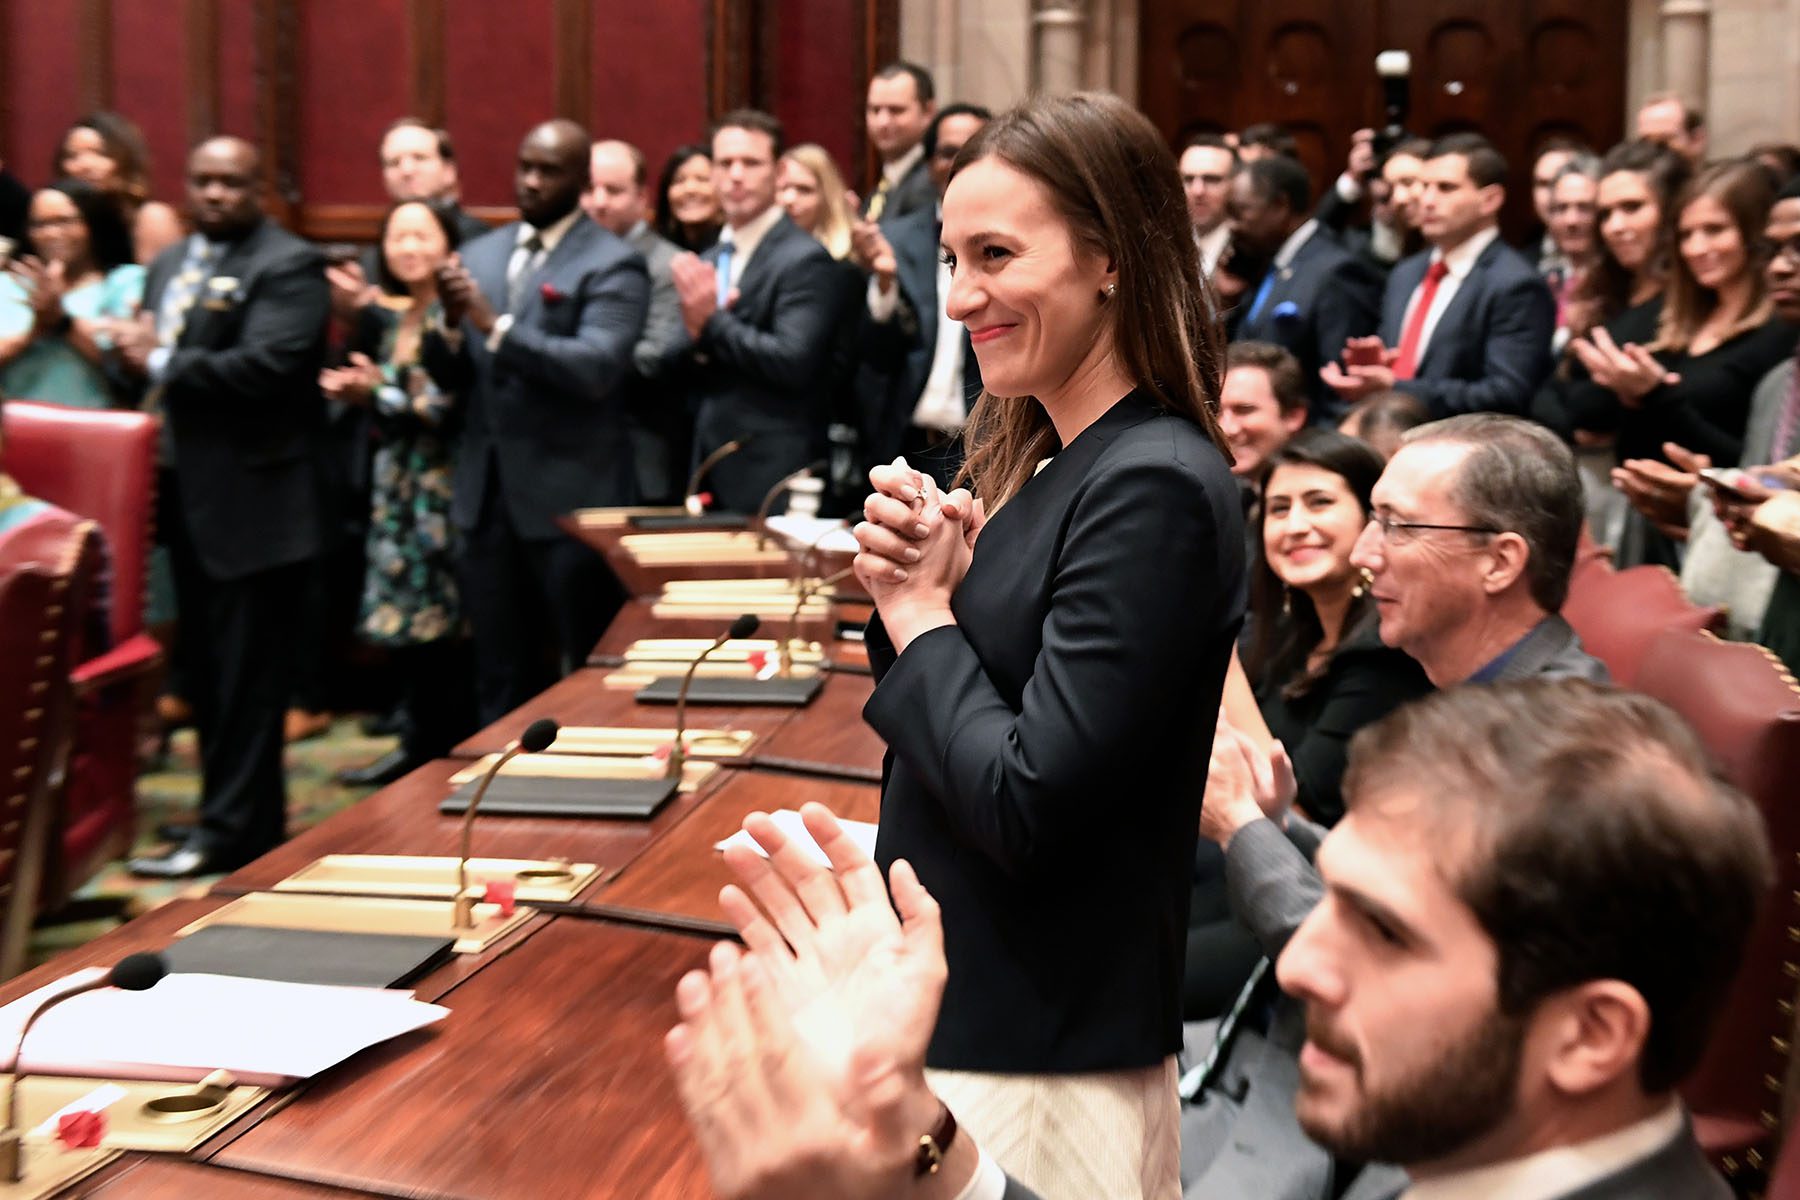 Sen. Alessandra Biaggi smiles as other elected officials clap.